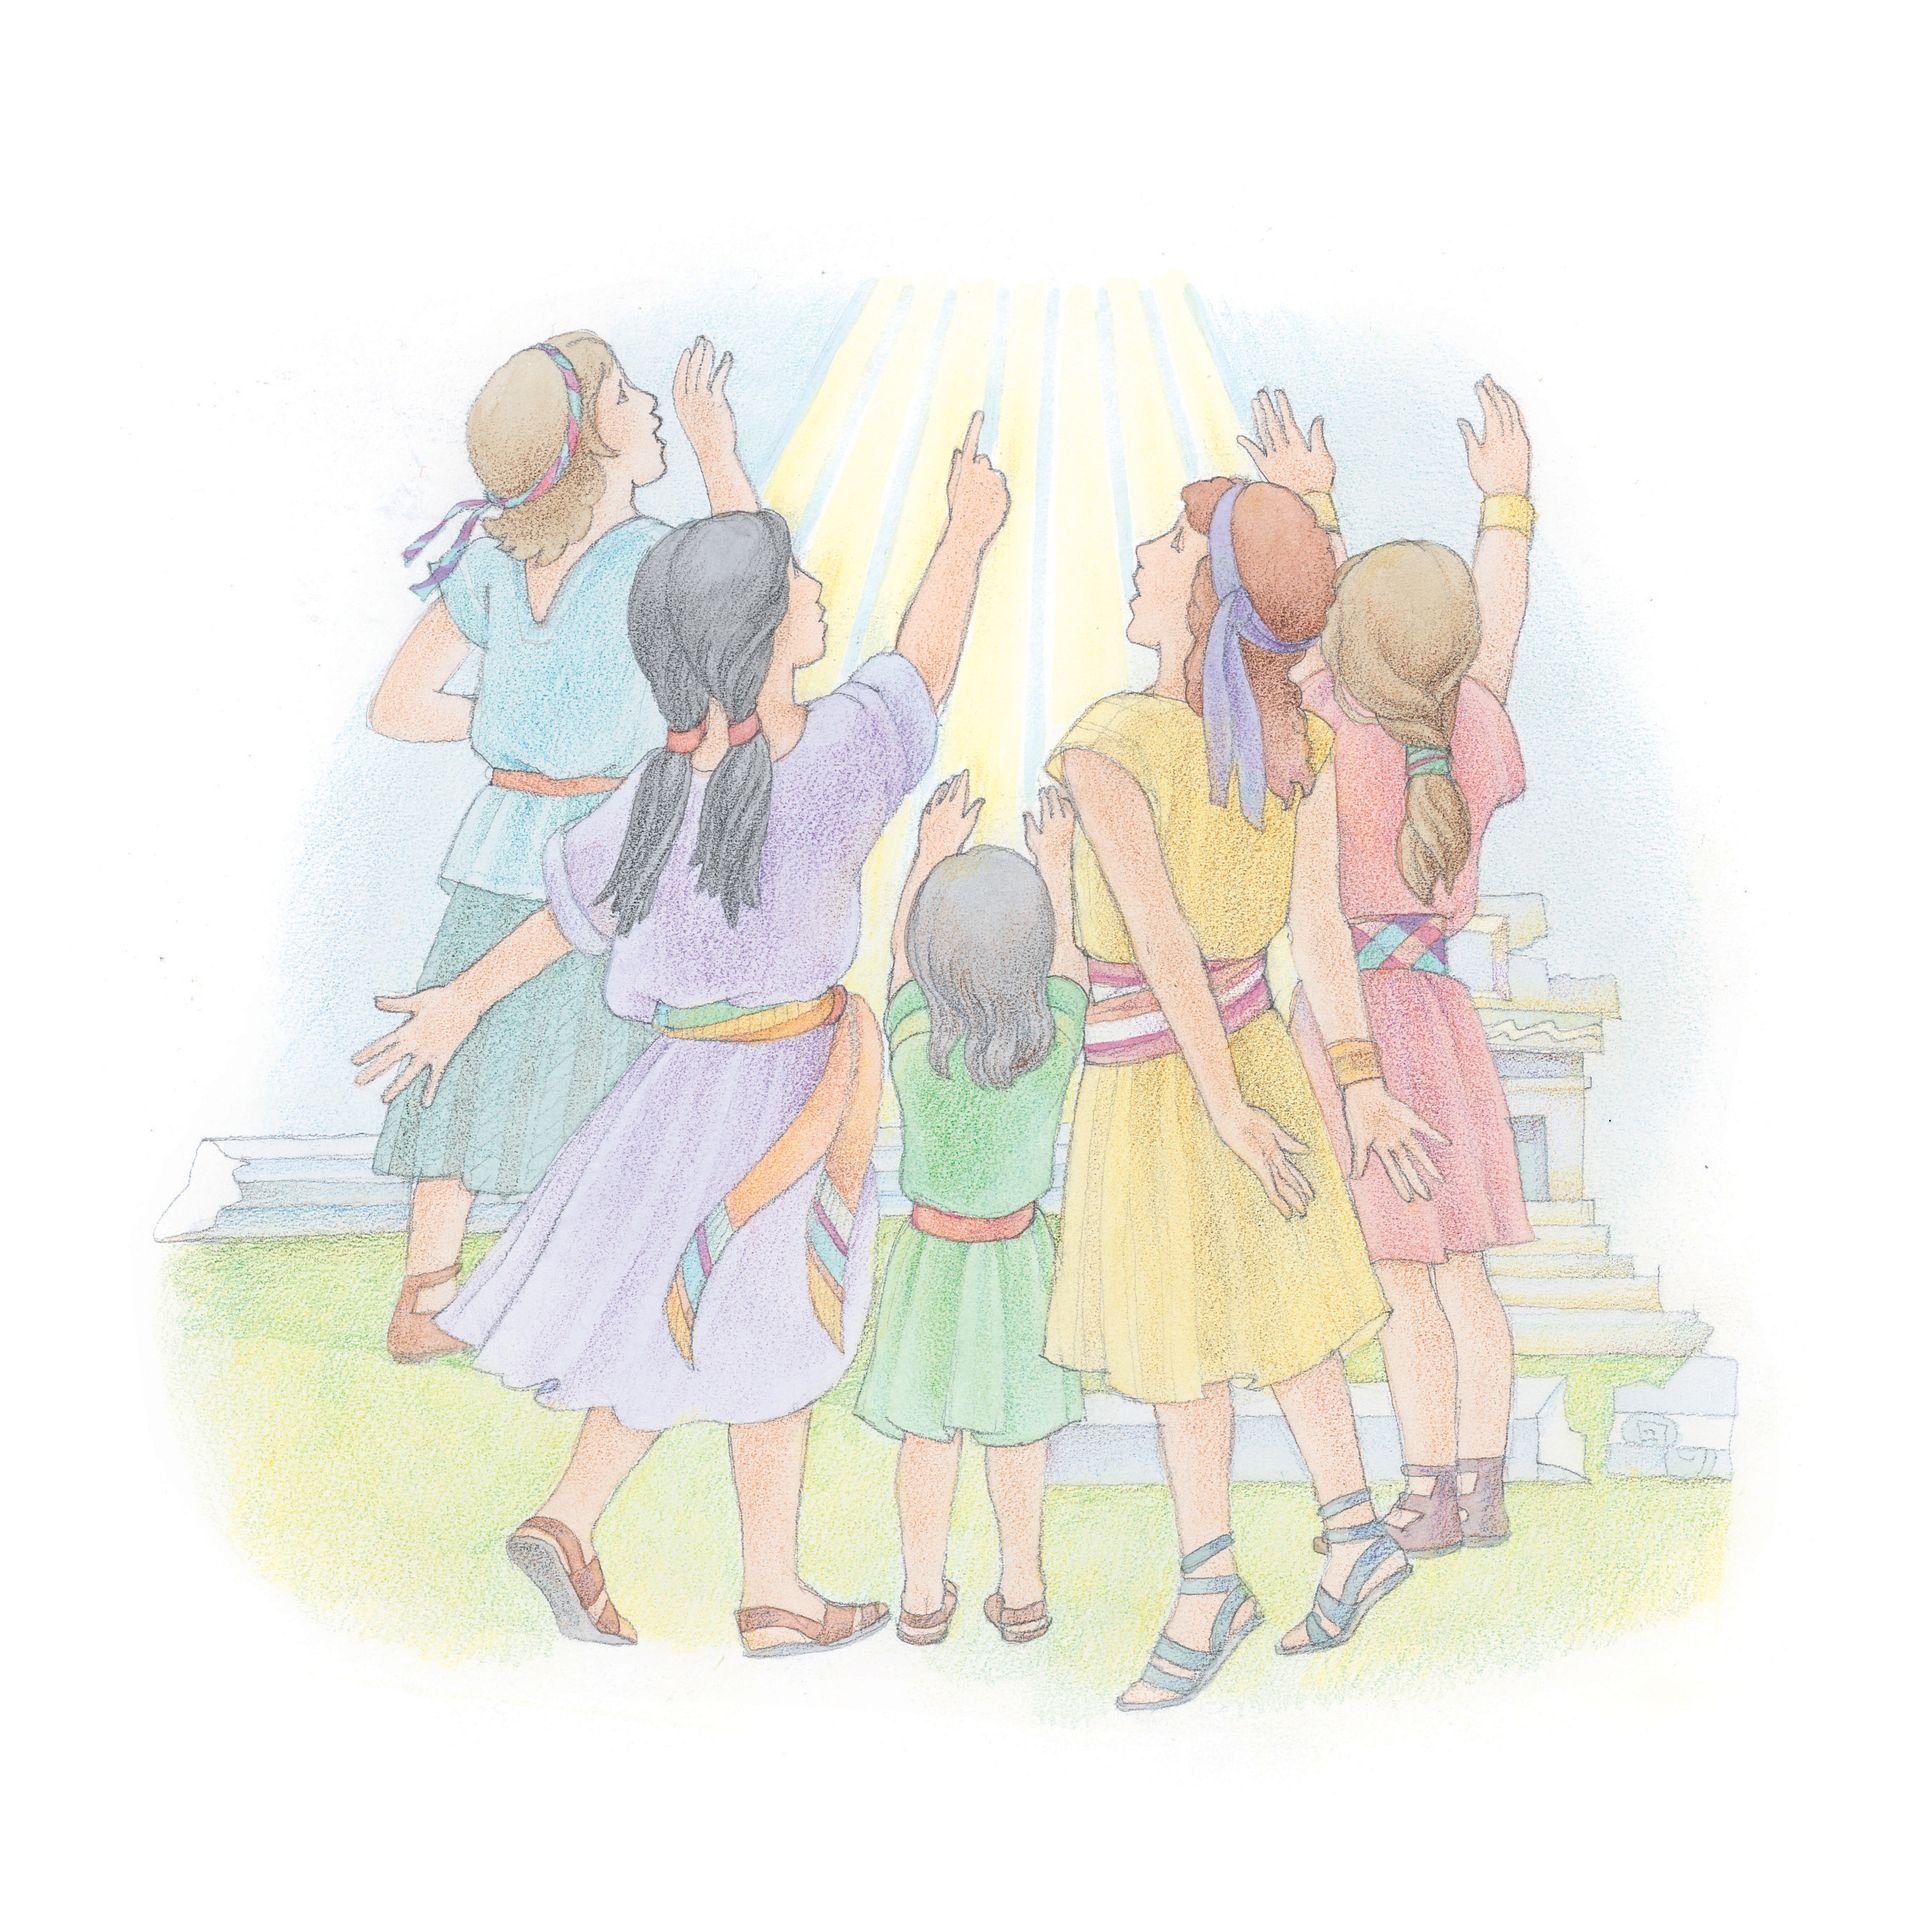 Book of Mormon–era young girls watching for Christ. From the Children’s Songbook, page 68, “Easter Hosanna”; watercolor illustration by Phyllis Luch.